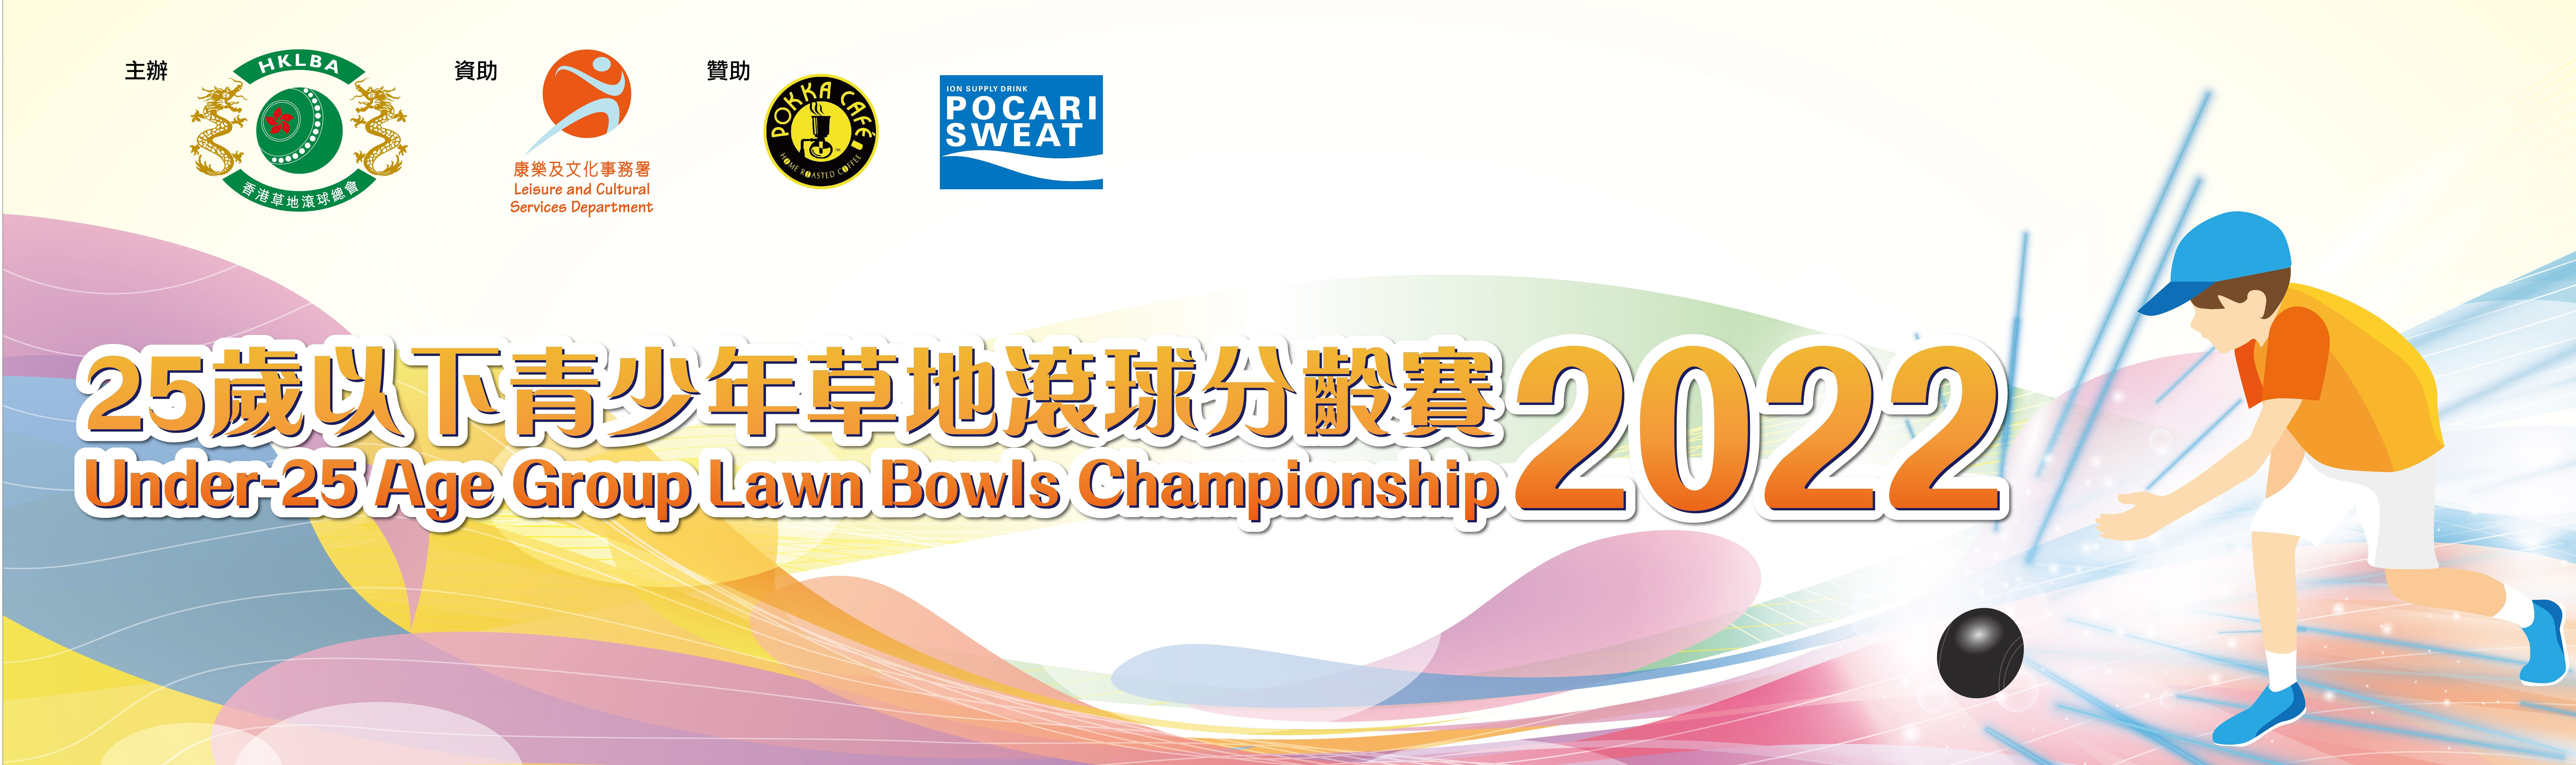 Under-25 Age Group Lawn Bowls Championship 2022 (Updated on 12/8/22)